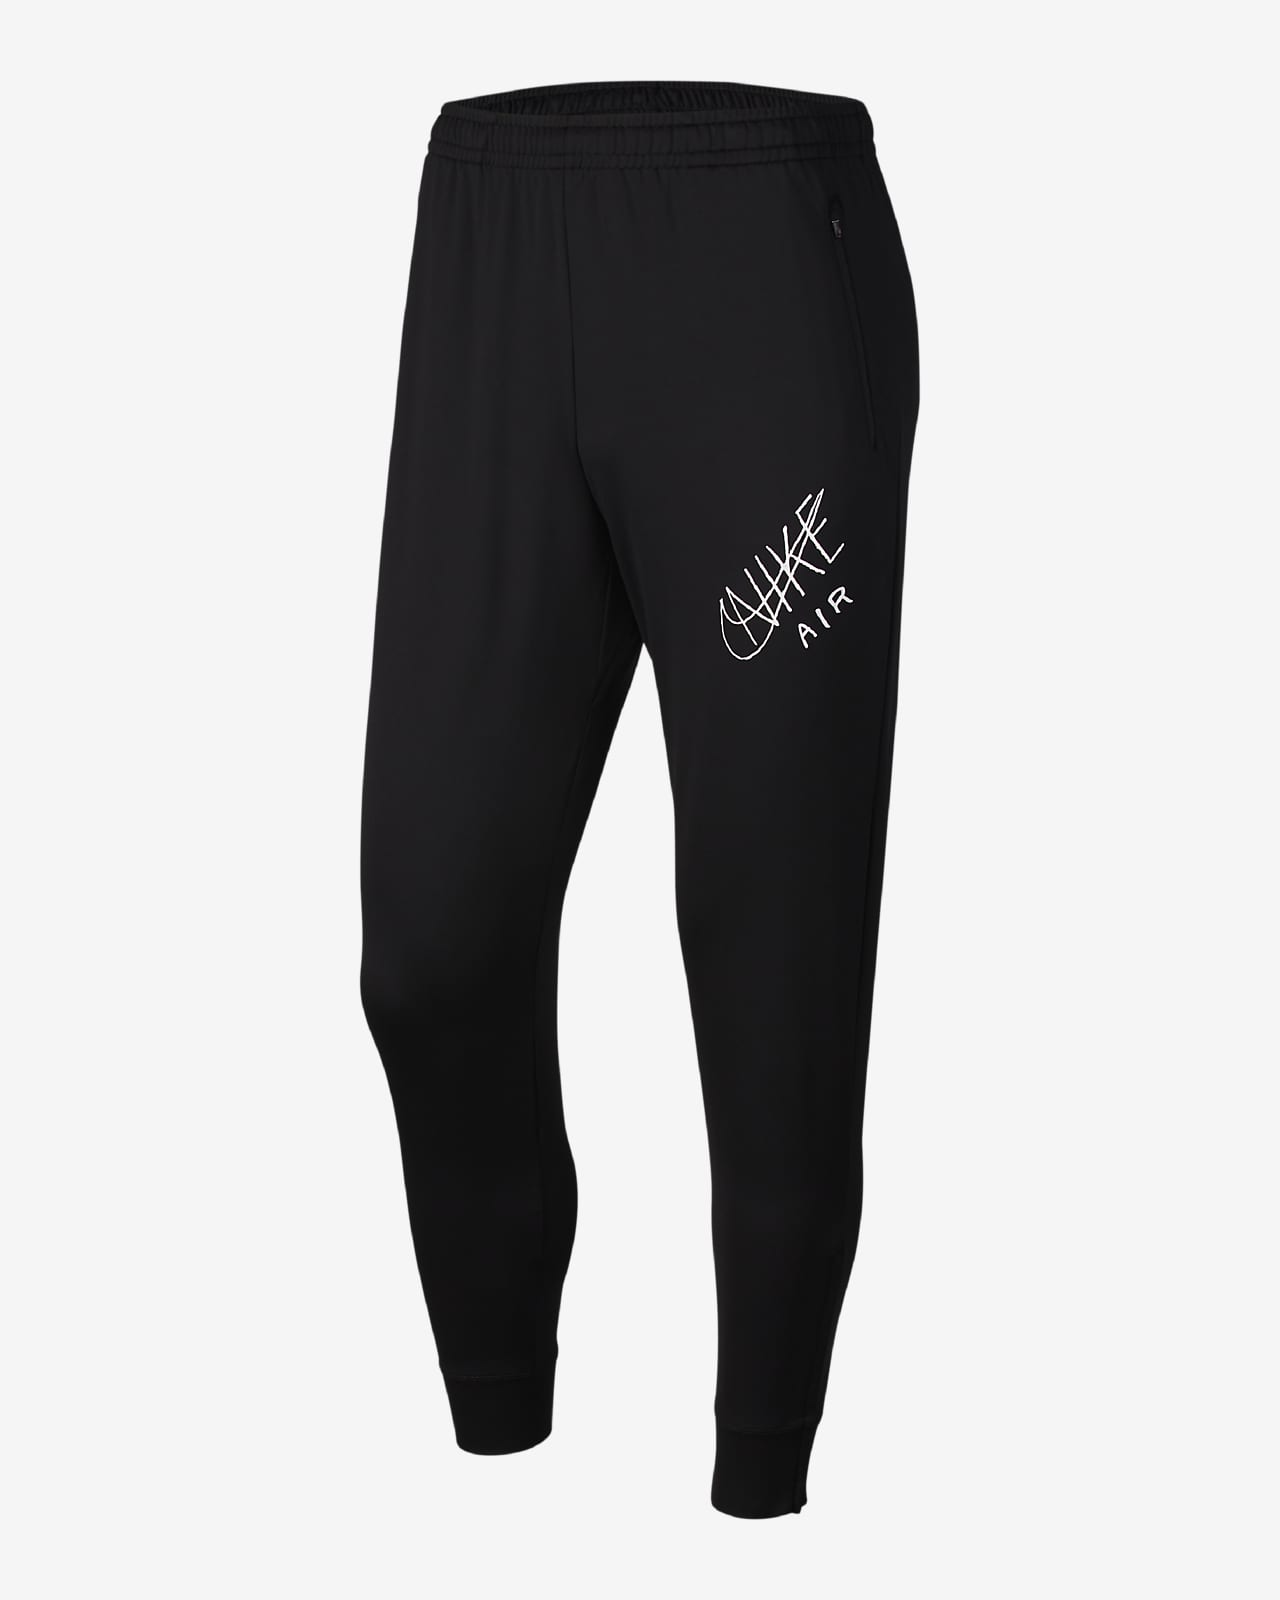 Nike Essential Men's Knit Running Trousers